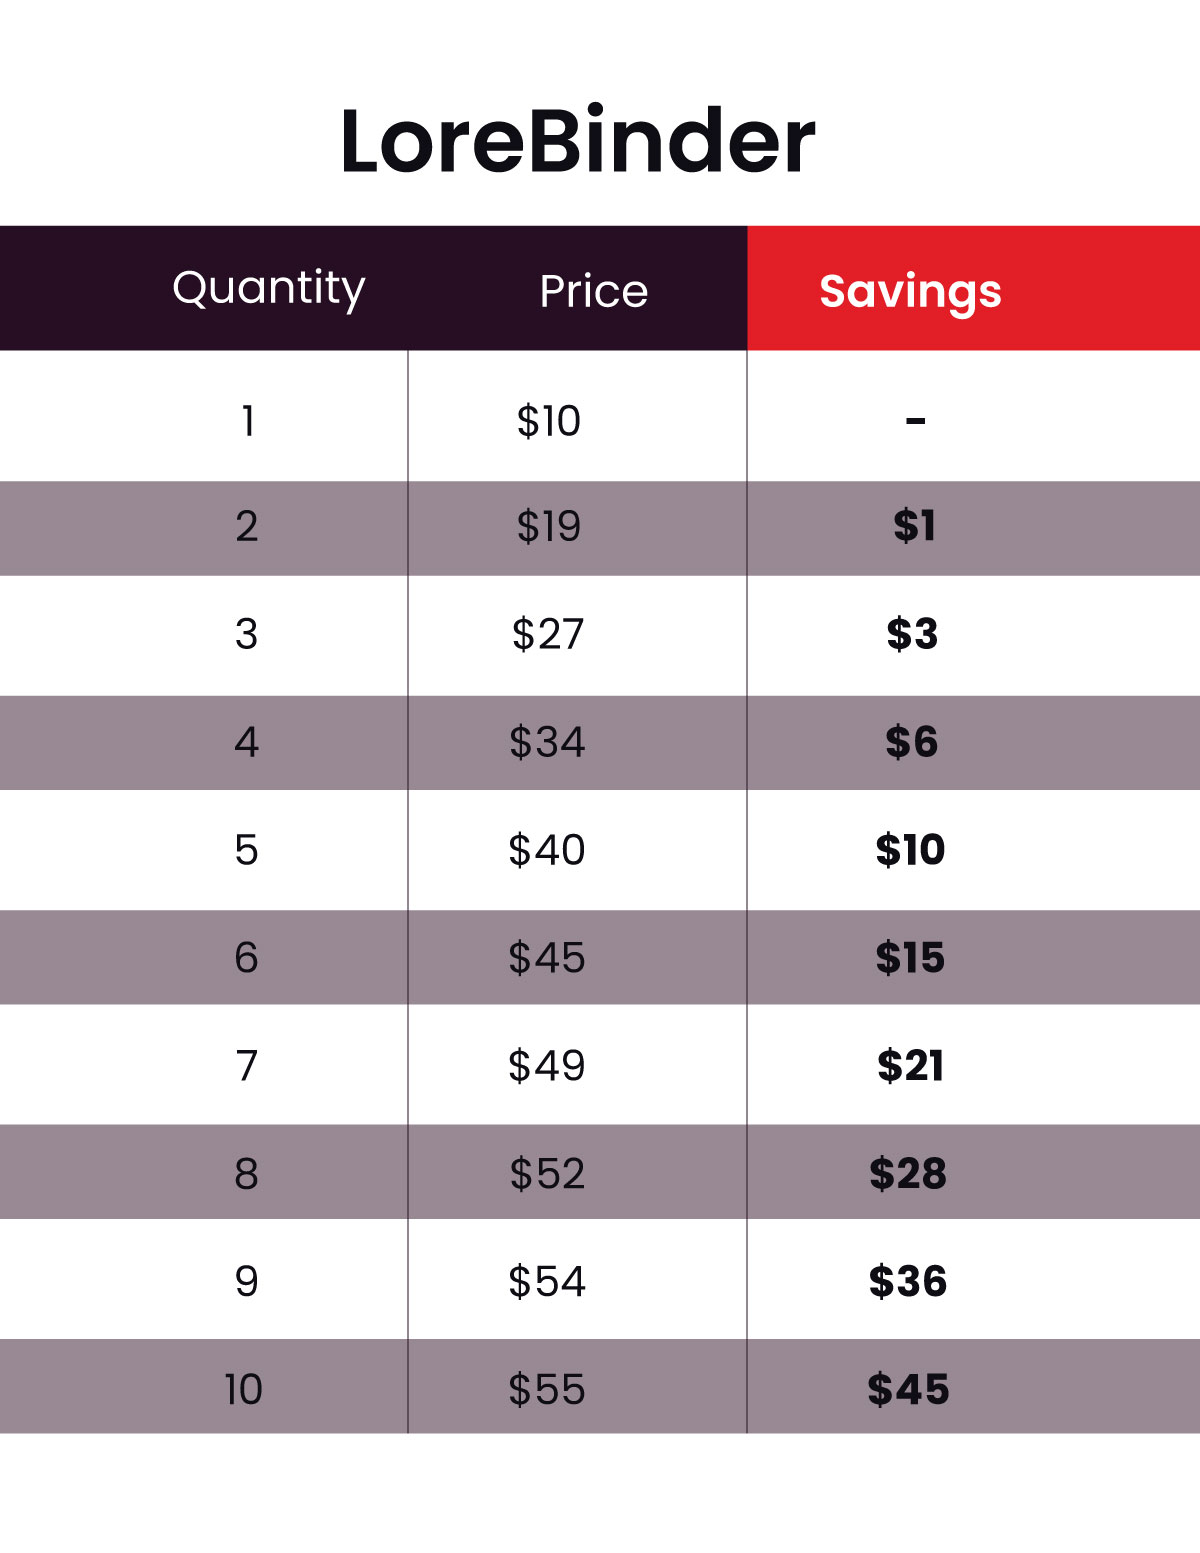 A pricing table for LoreBinder showing the cost savings at different quantities. Below are three rows and ten columns. The first row, labeled 'Quantity', has the numbers 1 through 10. The second row, labeled 'Price', lists prices from $10 to $55 in increments correlating to the quantity above. The third row, labeled 'Savings', shows the amount saved at each quantity, starting from '-' for 1 item, to '$45' savings for 10 items. The prices and savings increase progressively as the quantity increases.